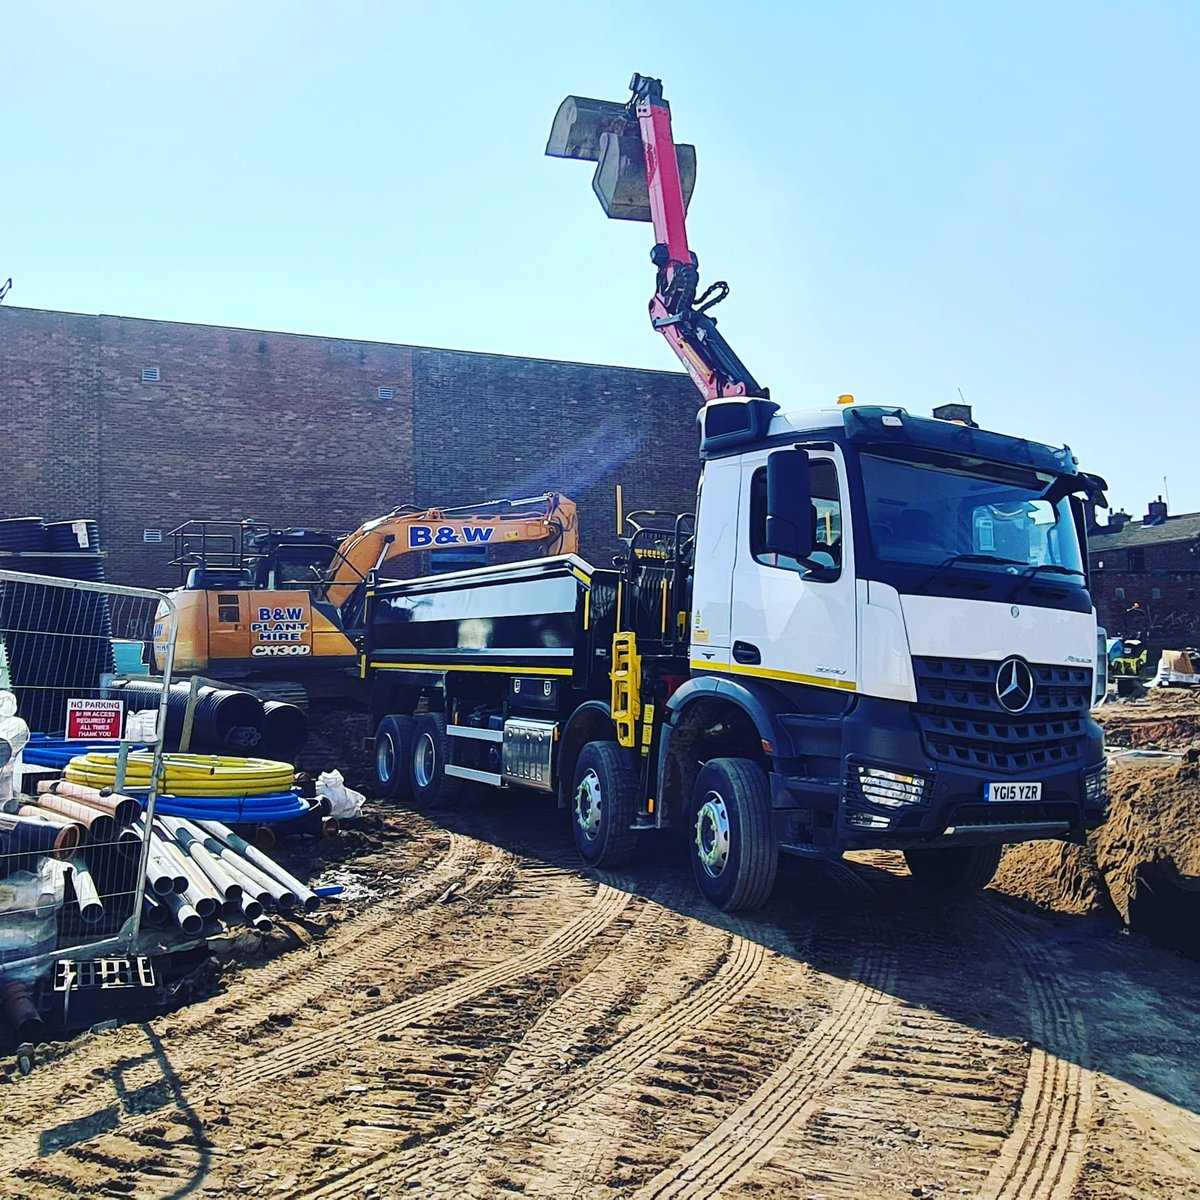 Grab hire £210 per load
Clay, Rubble, Mixed, Sods and soil.
We move it all for £210 16 tonne payload 
8 wheel Grab. #grabhire #liverpool #cheshire #builder #landscaping #muckaway #warrington #runcorn